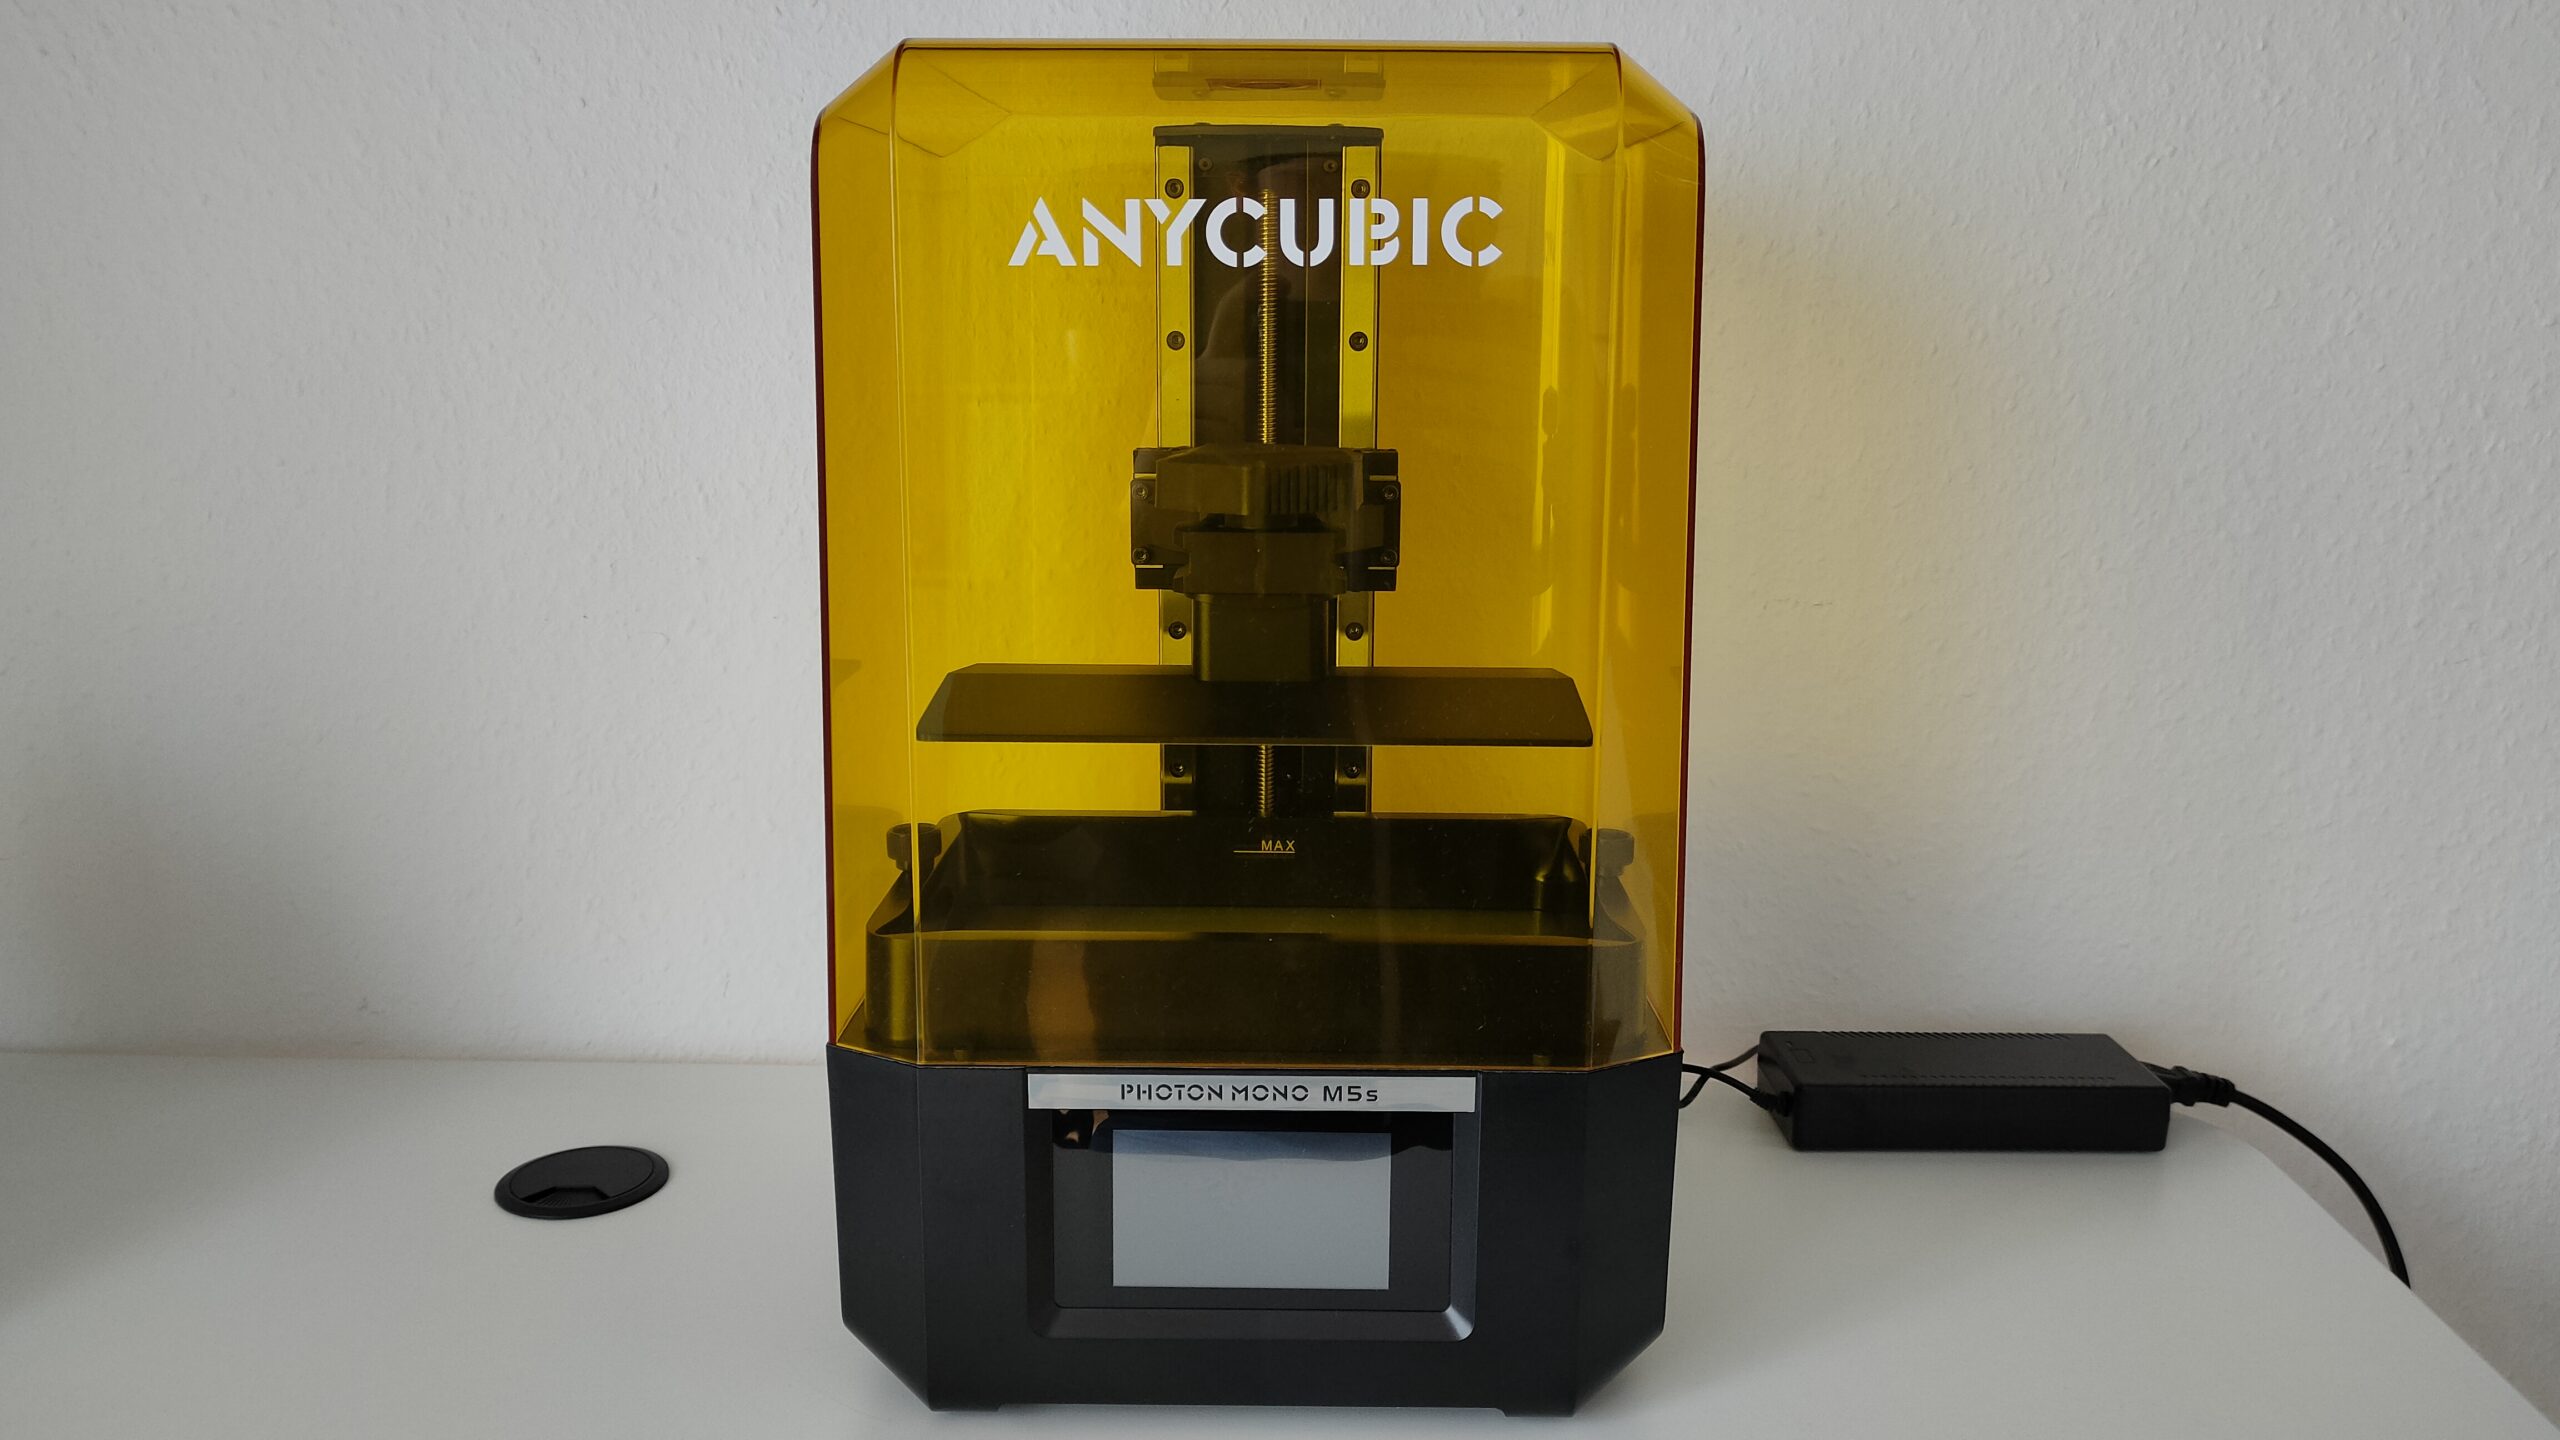 https://www.printer3d.one/wp-content/uploads/anycubic-photon-mono-m5s-12k-resin-3d-printer-test-and-review-after-1-month-impression-3d-azurmedia-nice-printer3d-one-02-scaled.jpg